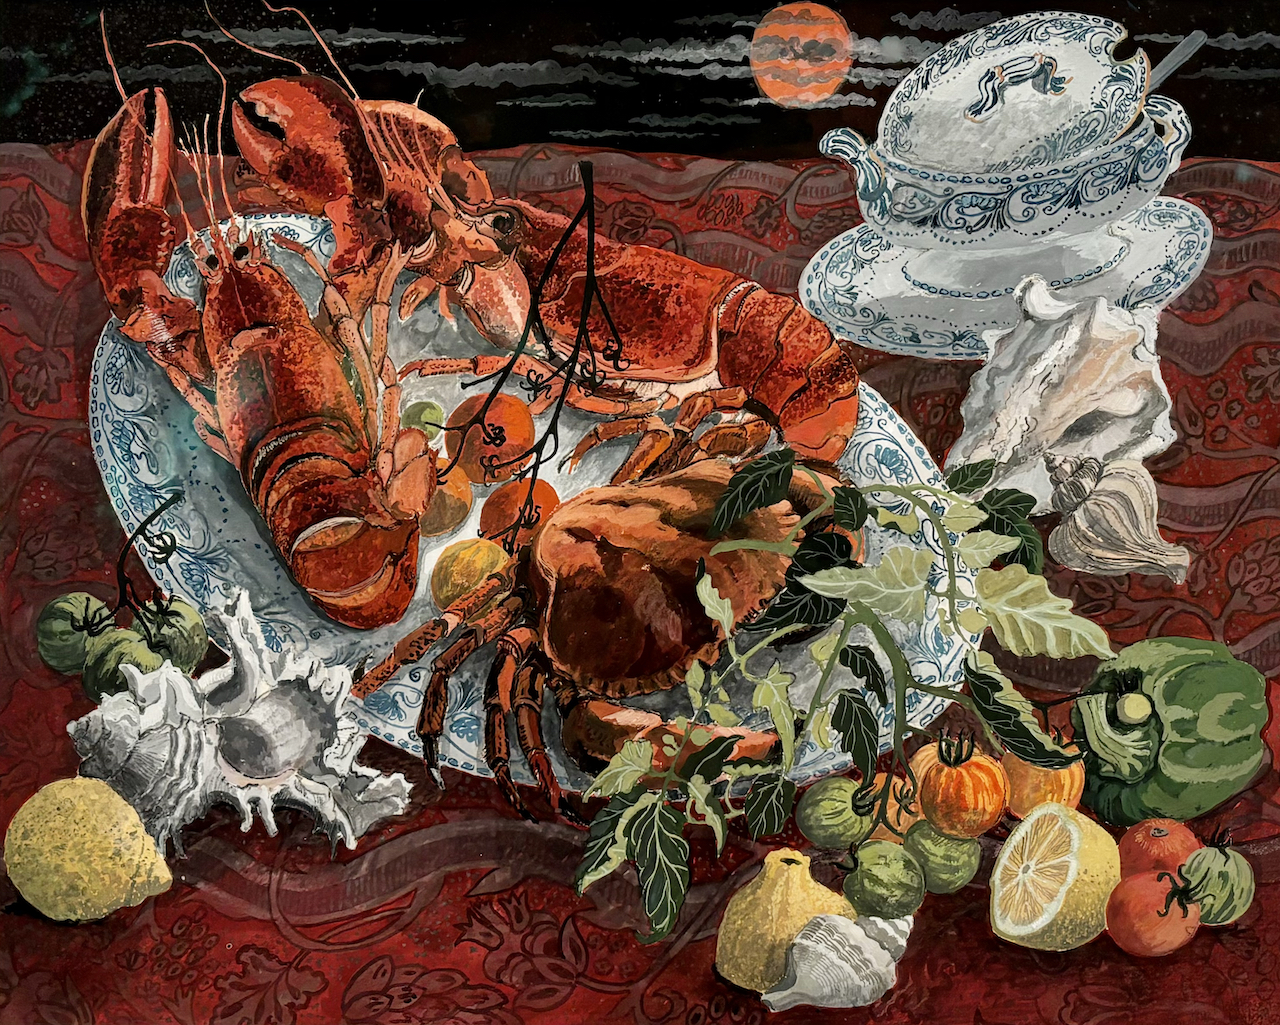 On the plate by Dione Page depicts a lobster and crab served on a plater surounded by citrus and sea shells upon a deep red table cloth.